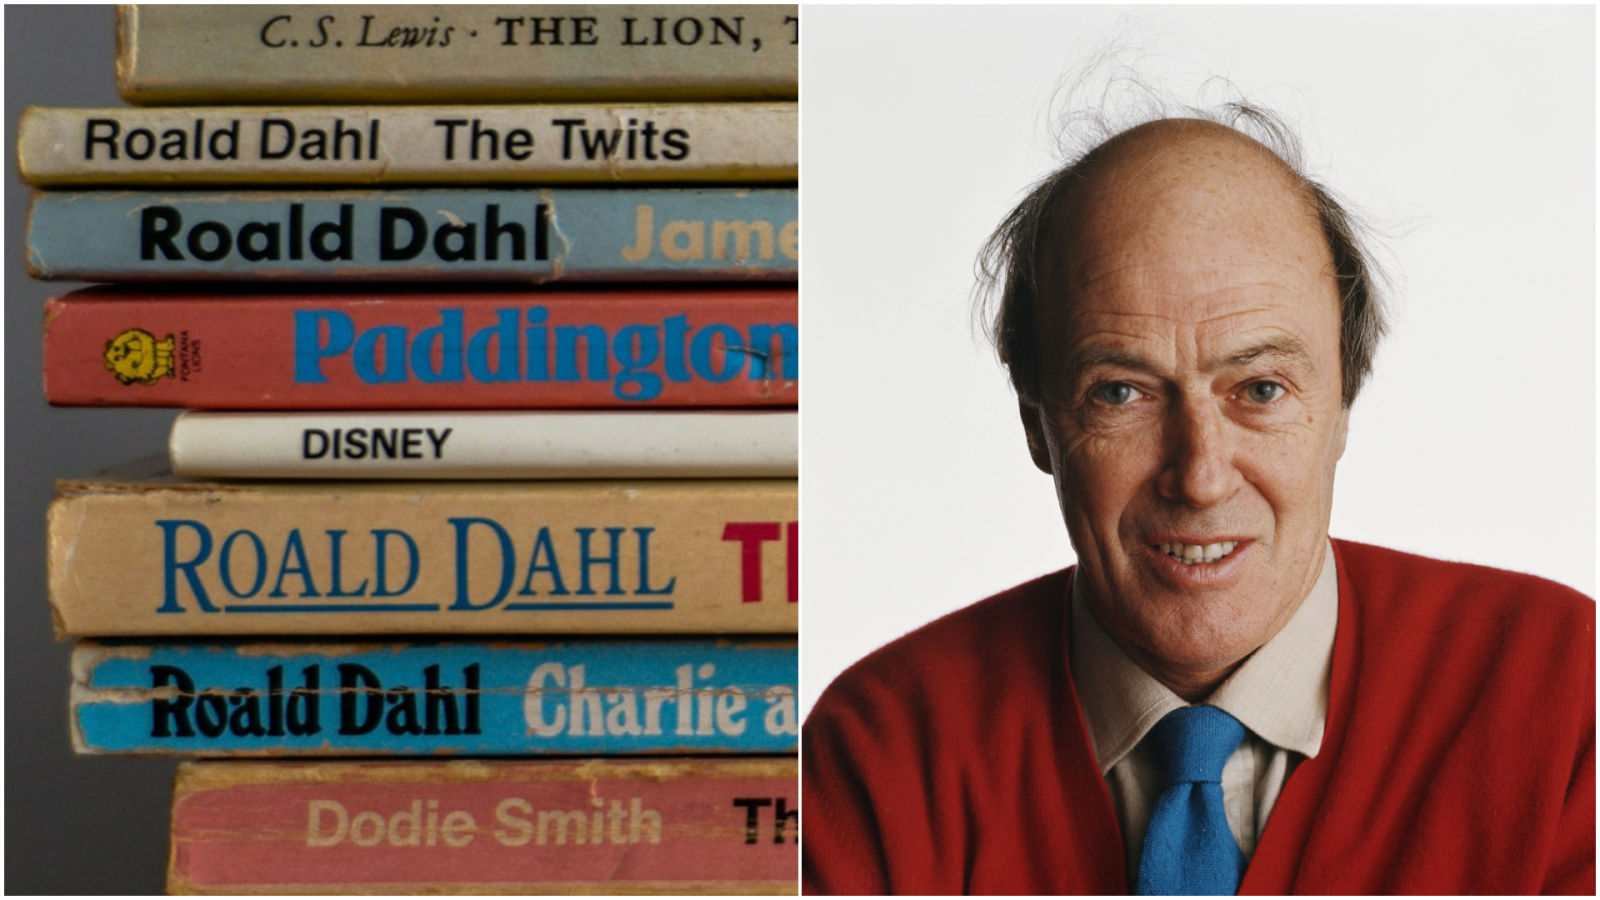 Readers to be given option of original or edited Roald Dahl book editions